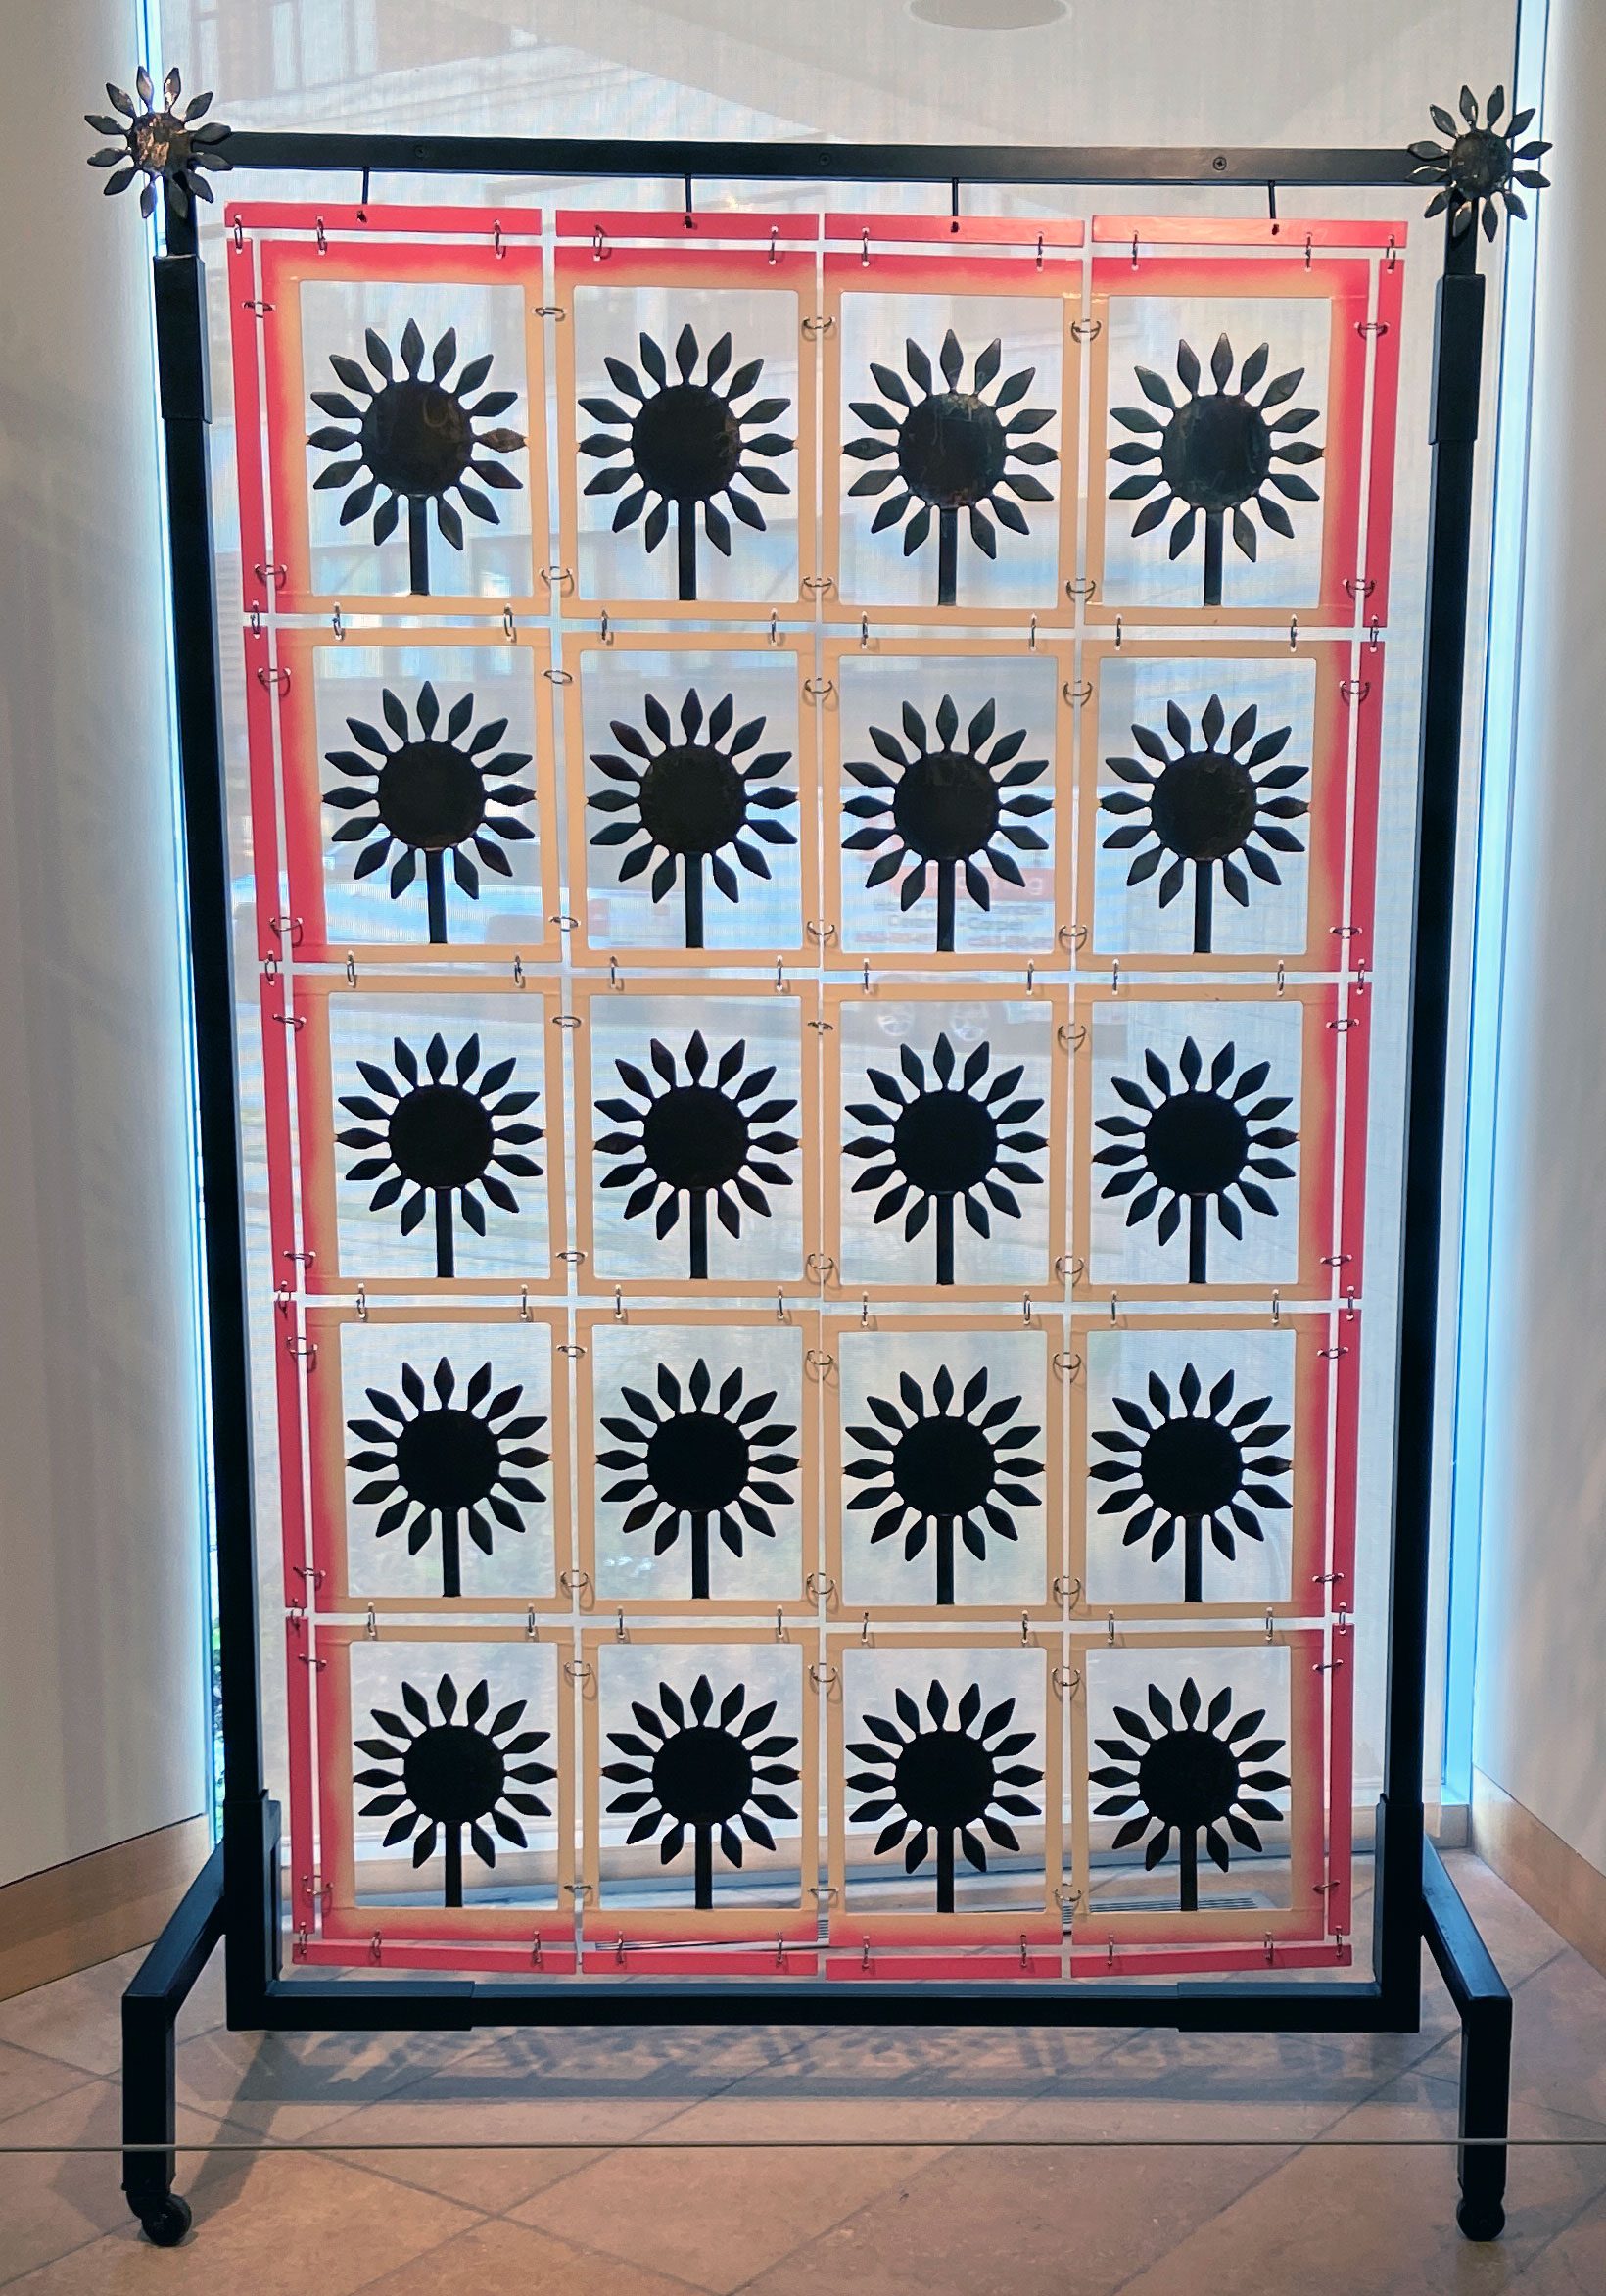 John Martinson, Quilt, 2011, steel, paint, varnish, and binder rings, 84x57x24 inches, collection of the artist